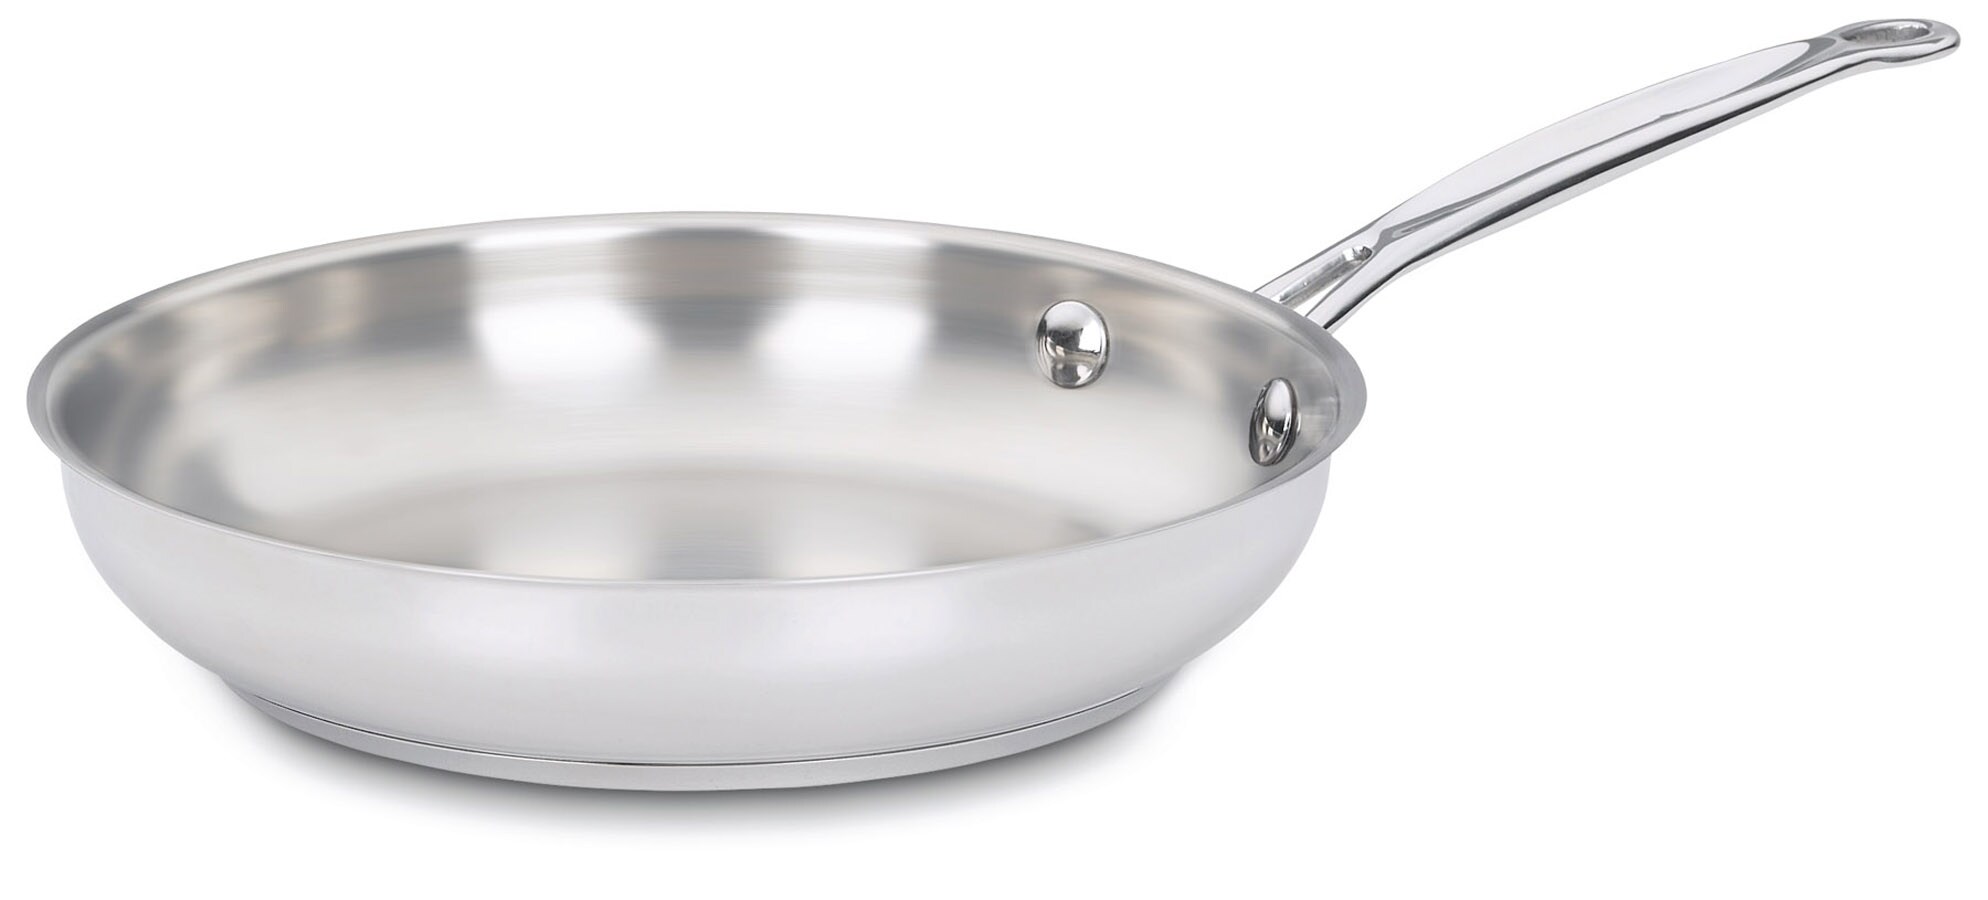 Cuisinart Chef's Classic 9-in Stainless Steel Skillet at Lowes.com